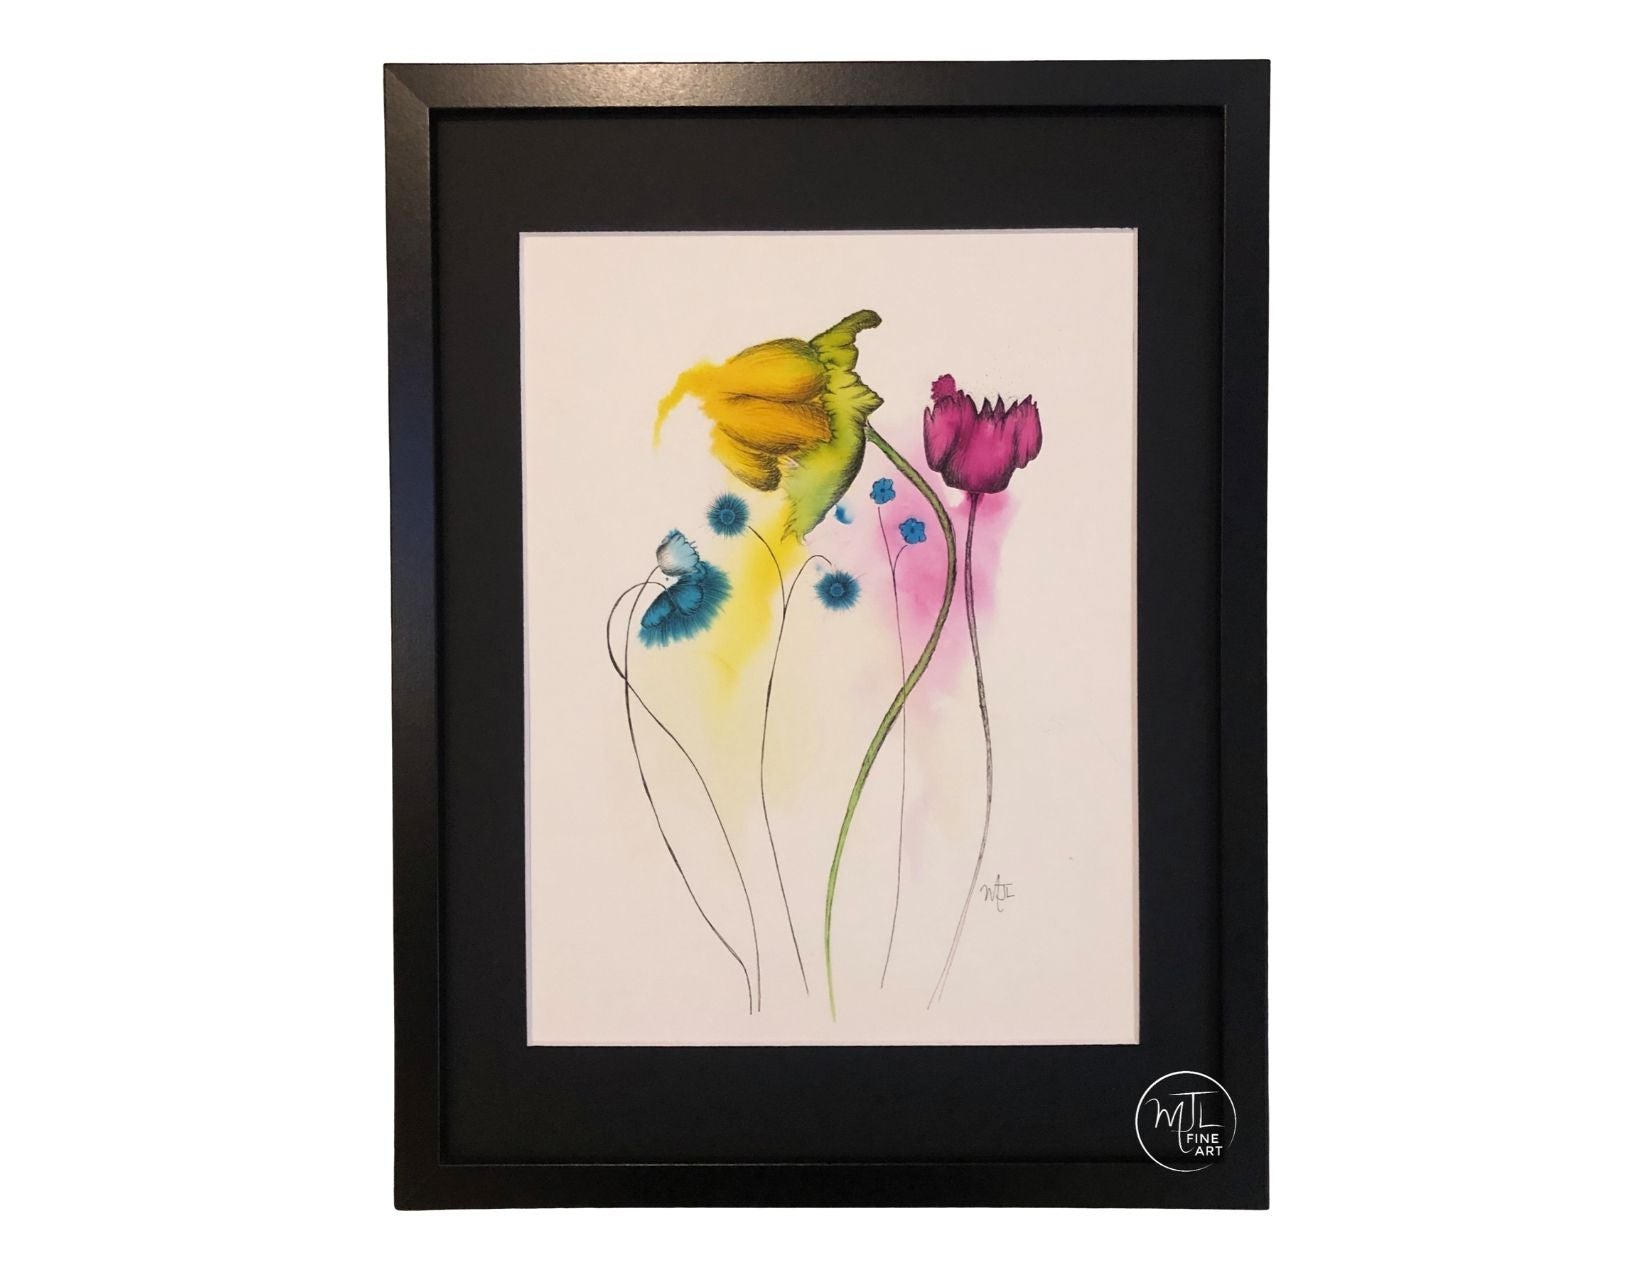 framed version of basking a variety of flowers in vibrant watercolor original art with ink sketch overlay prints